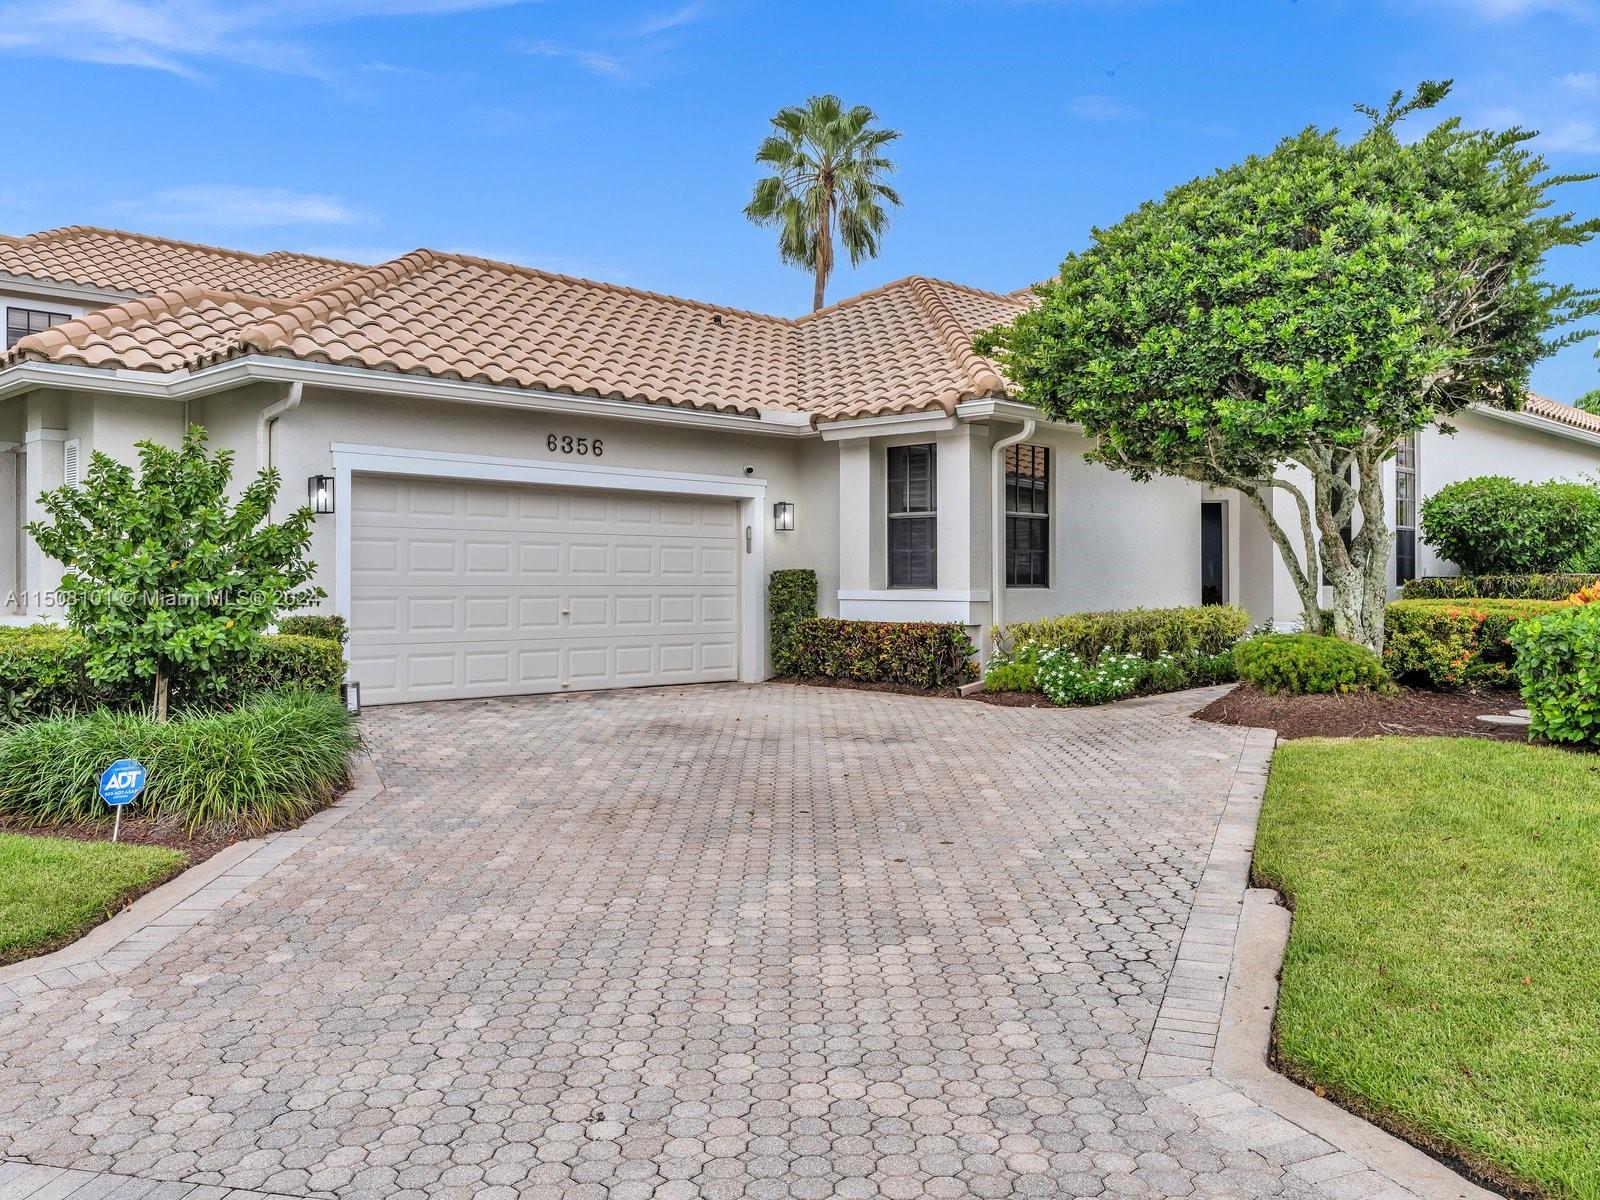 Photo of 6356 NW 25th Wy in Boca Raton, FL